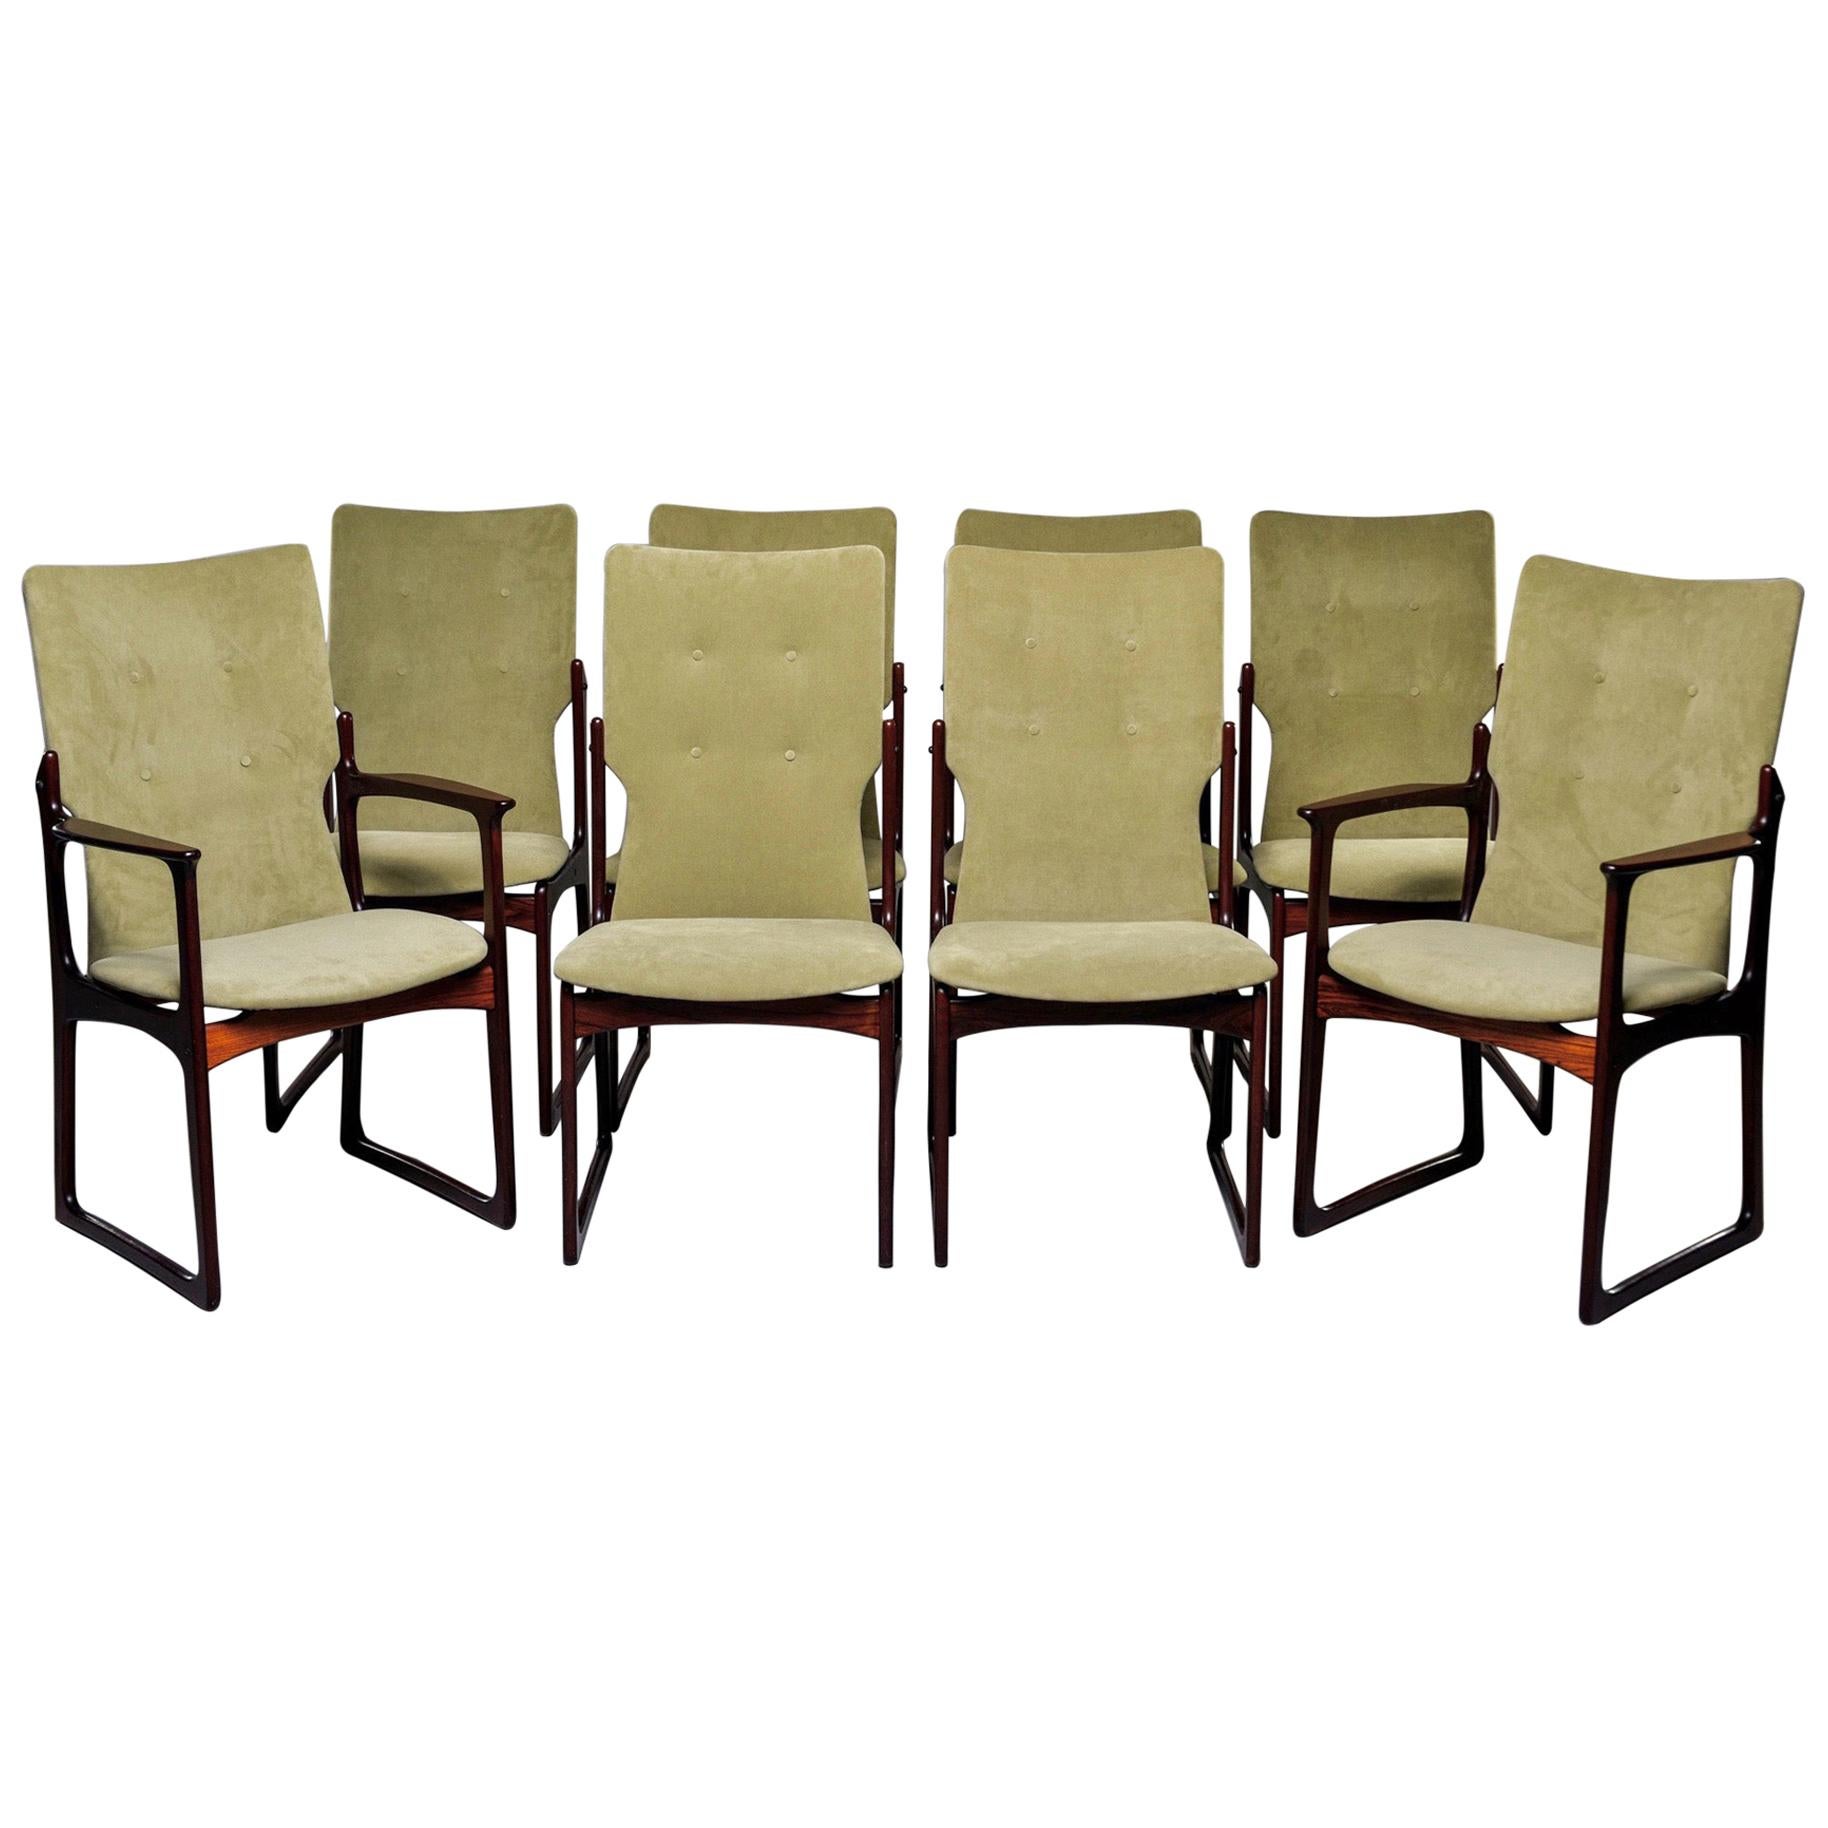 Set of 8 Mid Century Danish Rosewood Dining Chairs by Kurt Ostervig for Vamdrup